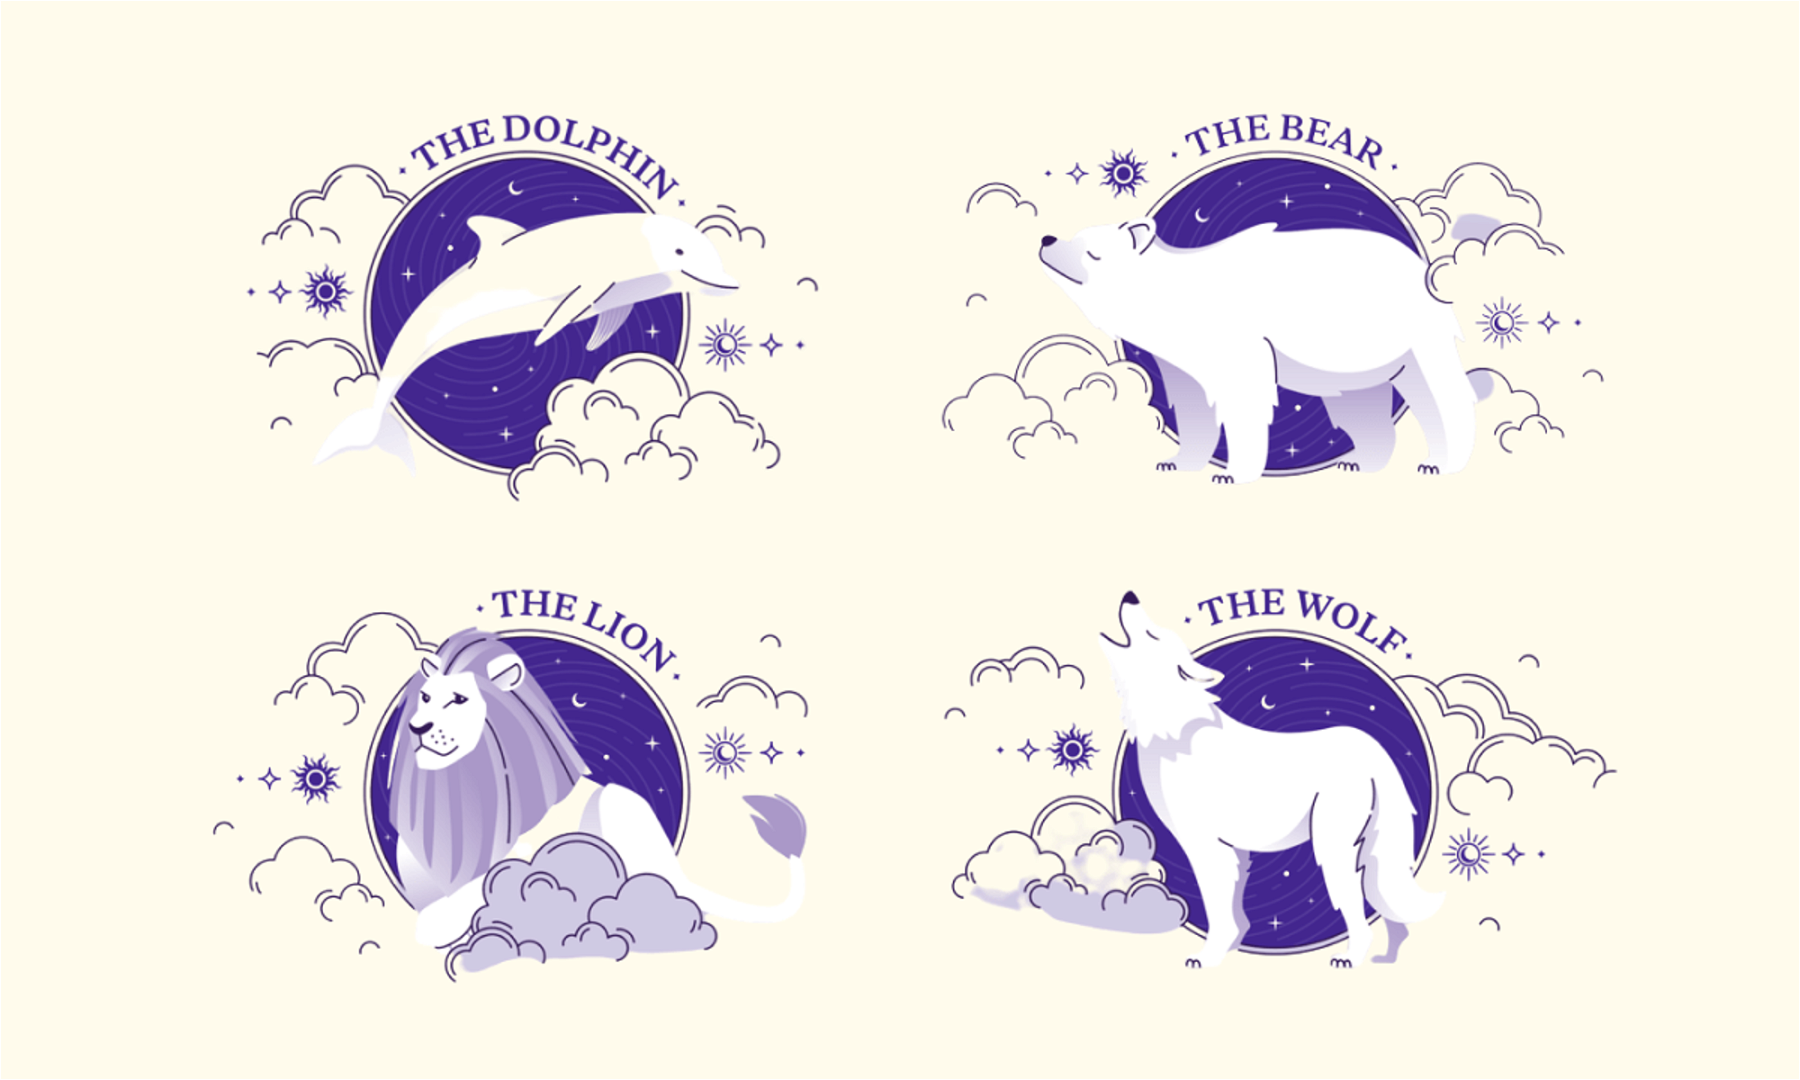 What is your Chronotype? The bear, the lion, the wolf or the dolphin?